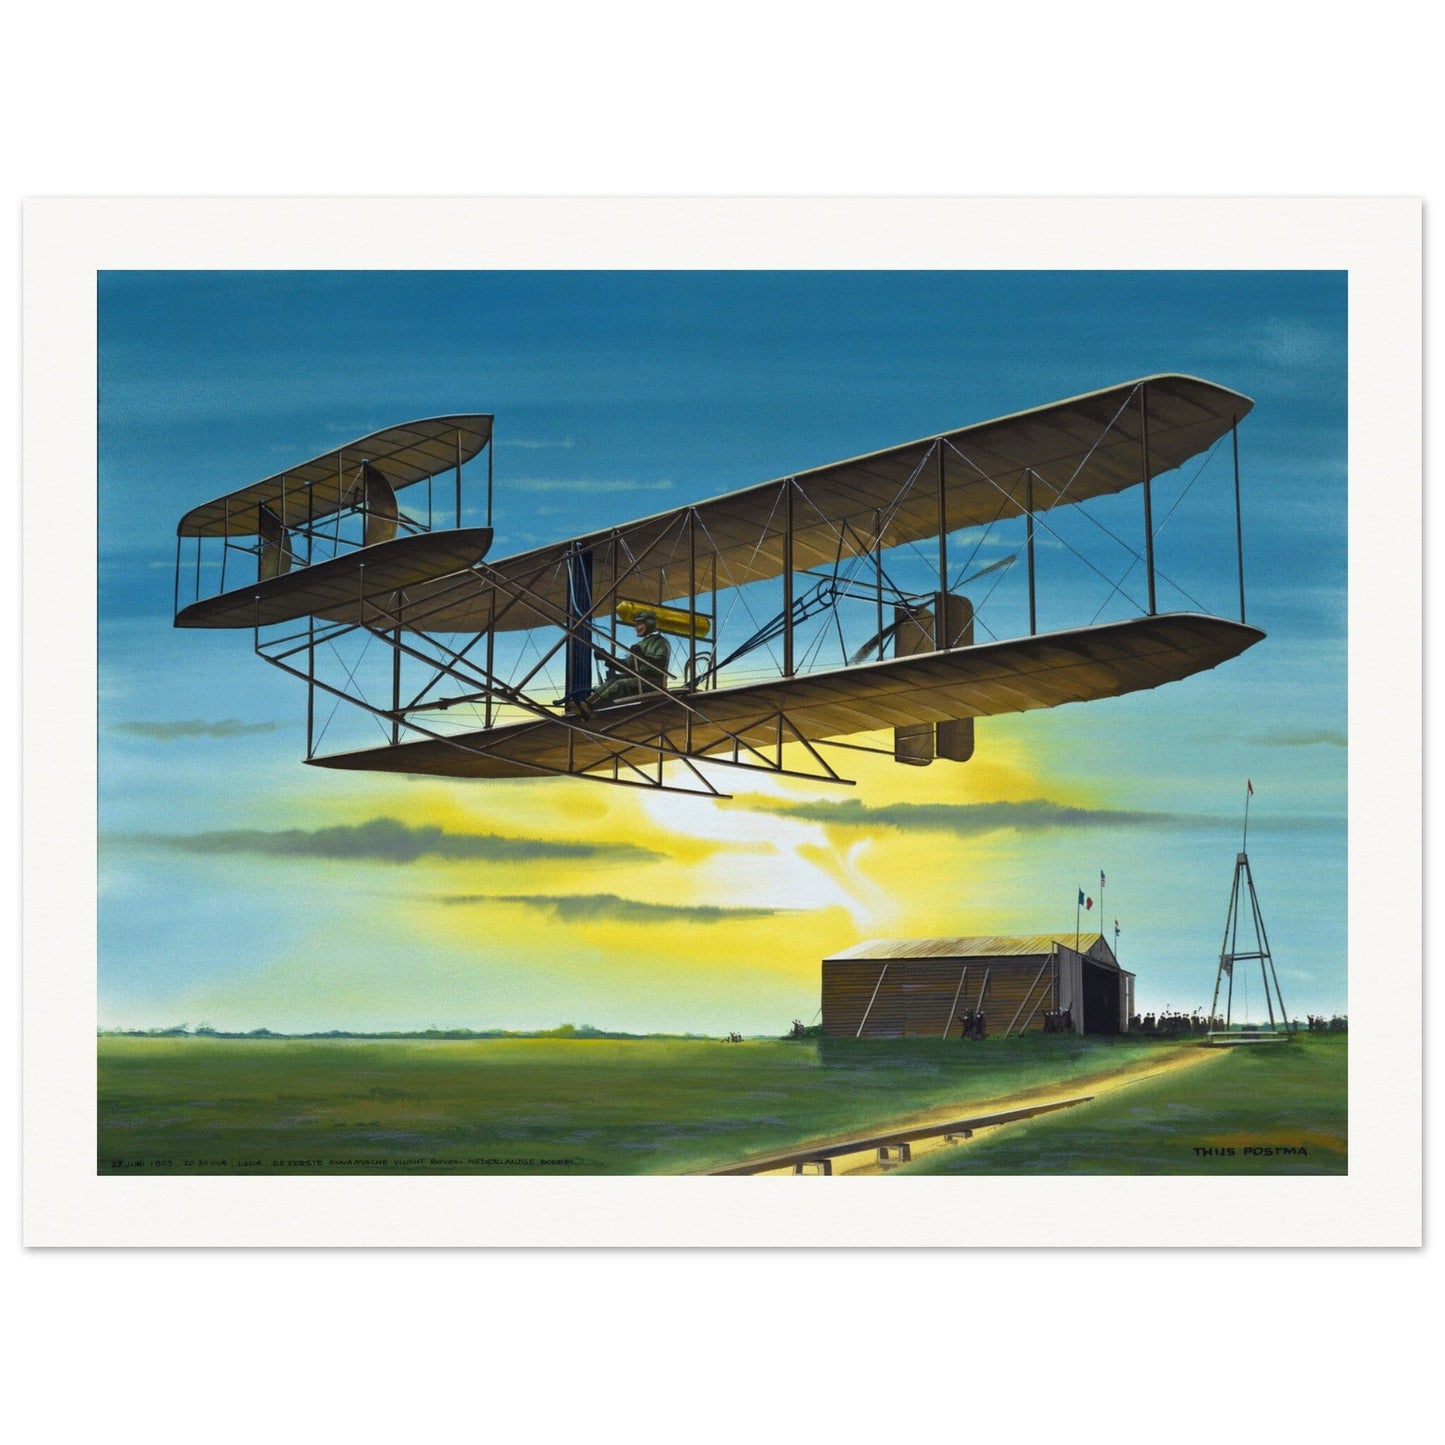 Thijs Postma - Poster - Wright Flyer First Flight Over The Netherlands 1909 Poster Only TP Aviation Art 60x80 cm / 24x32″ 